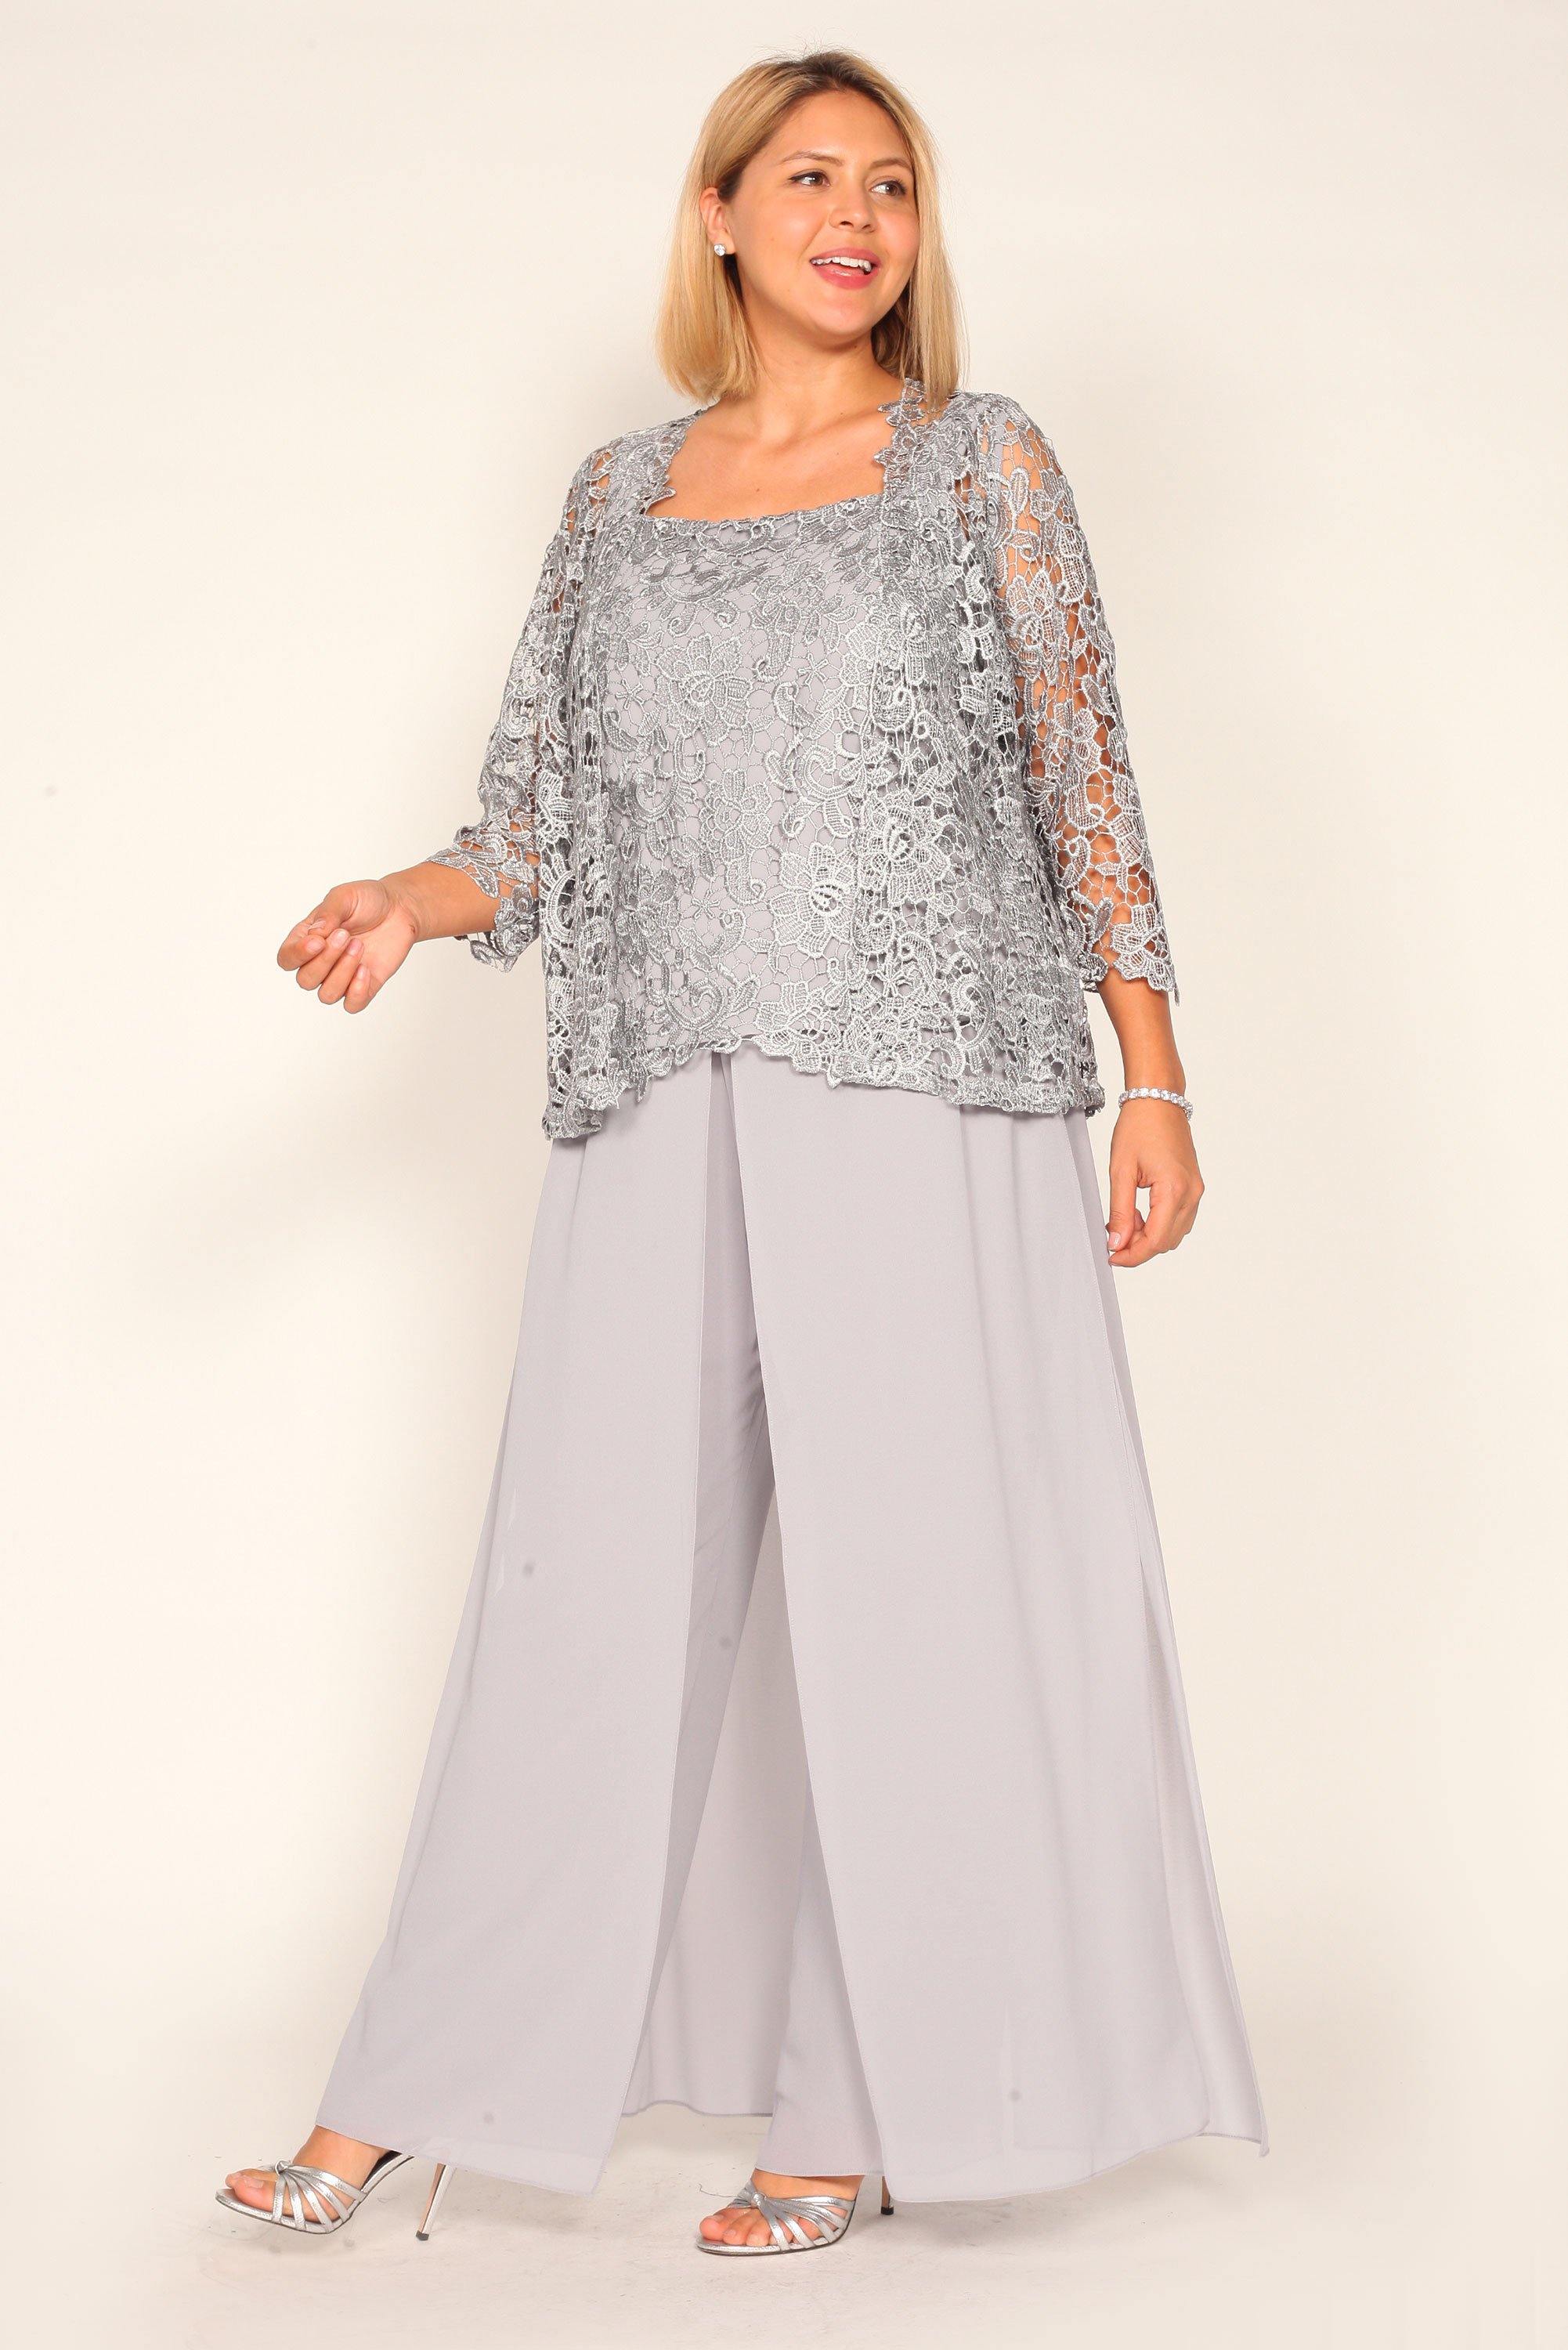 Mother of the Bride Pant Suit for $129.99 – The Dress Outlet